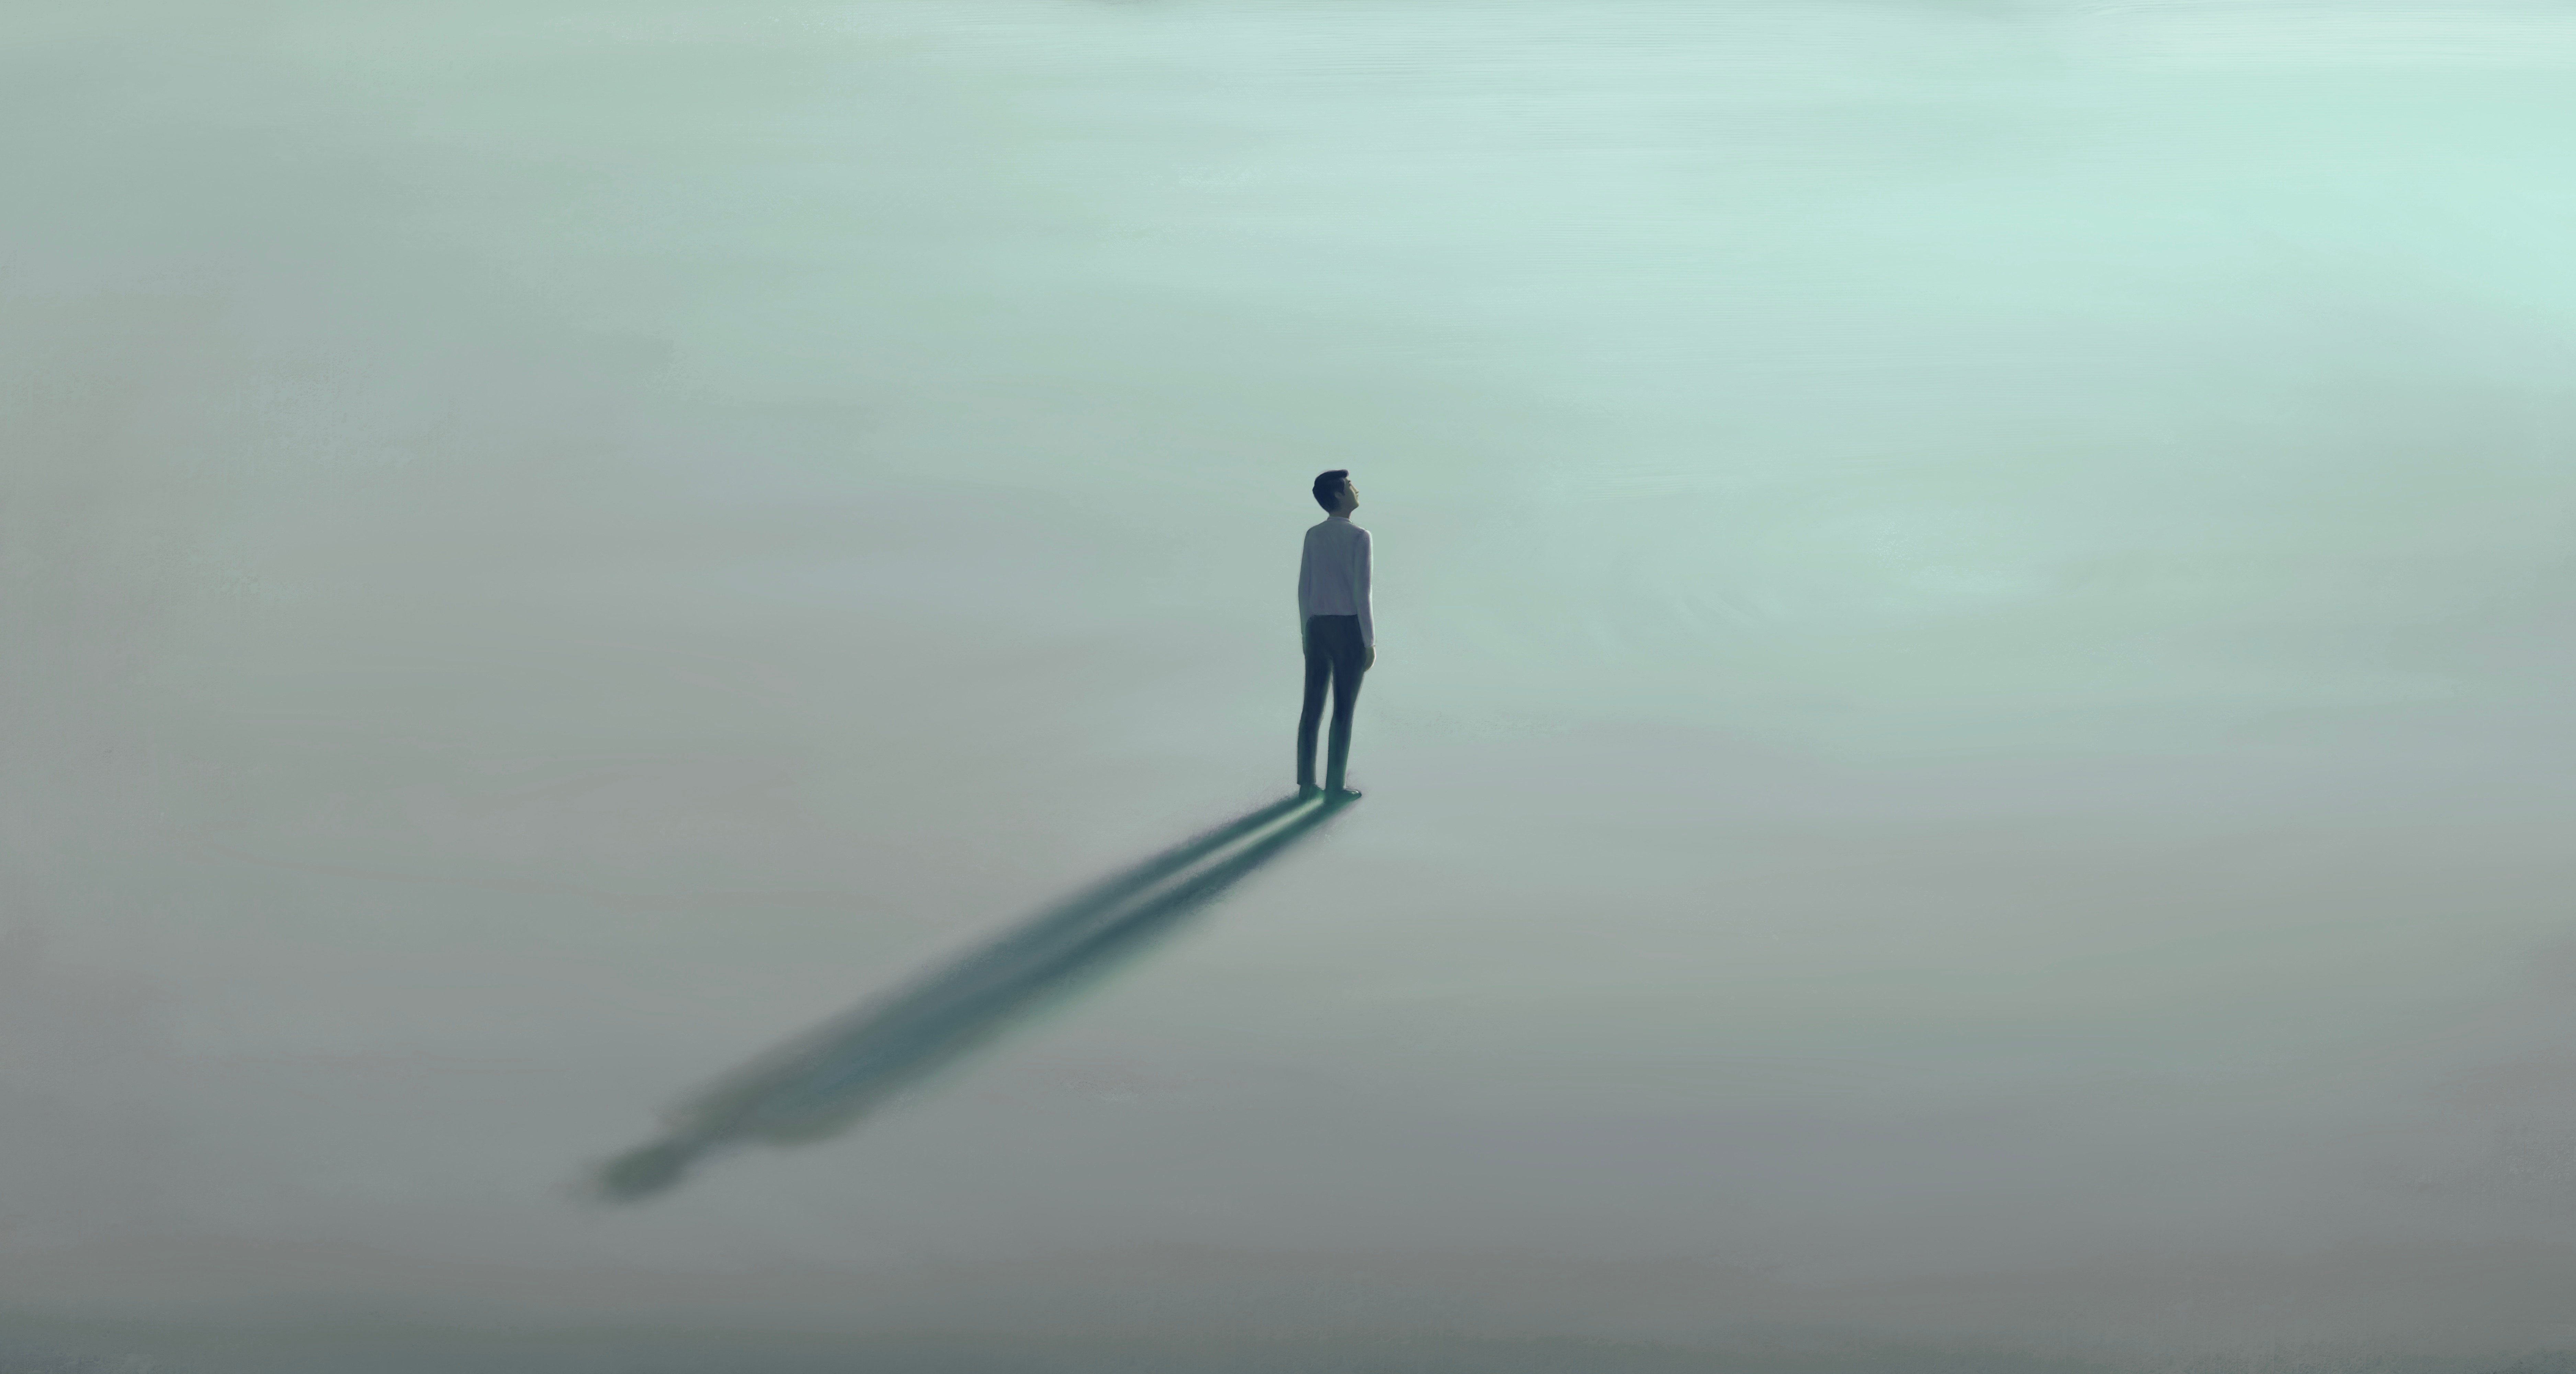 Lonely young man with the light. painting illustration By Jorm Sangsorn